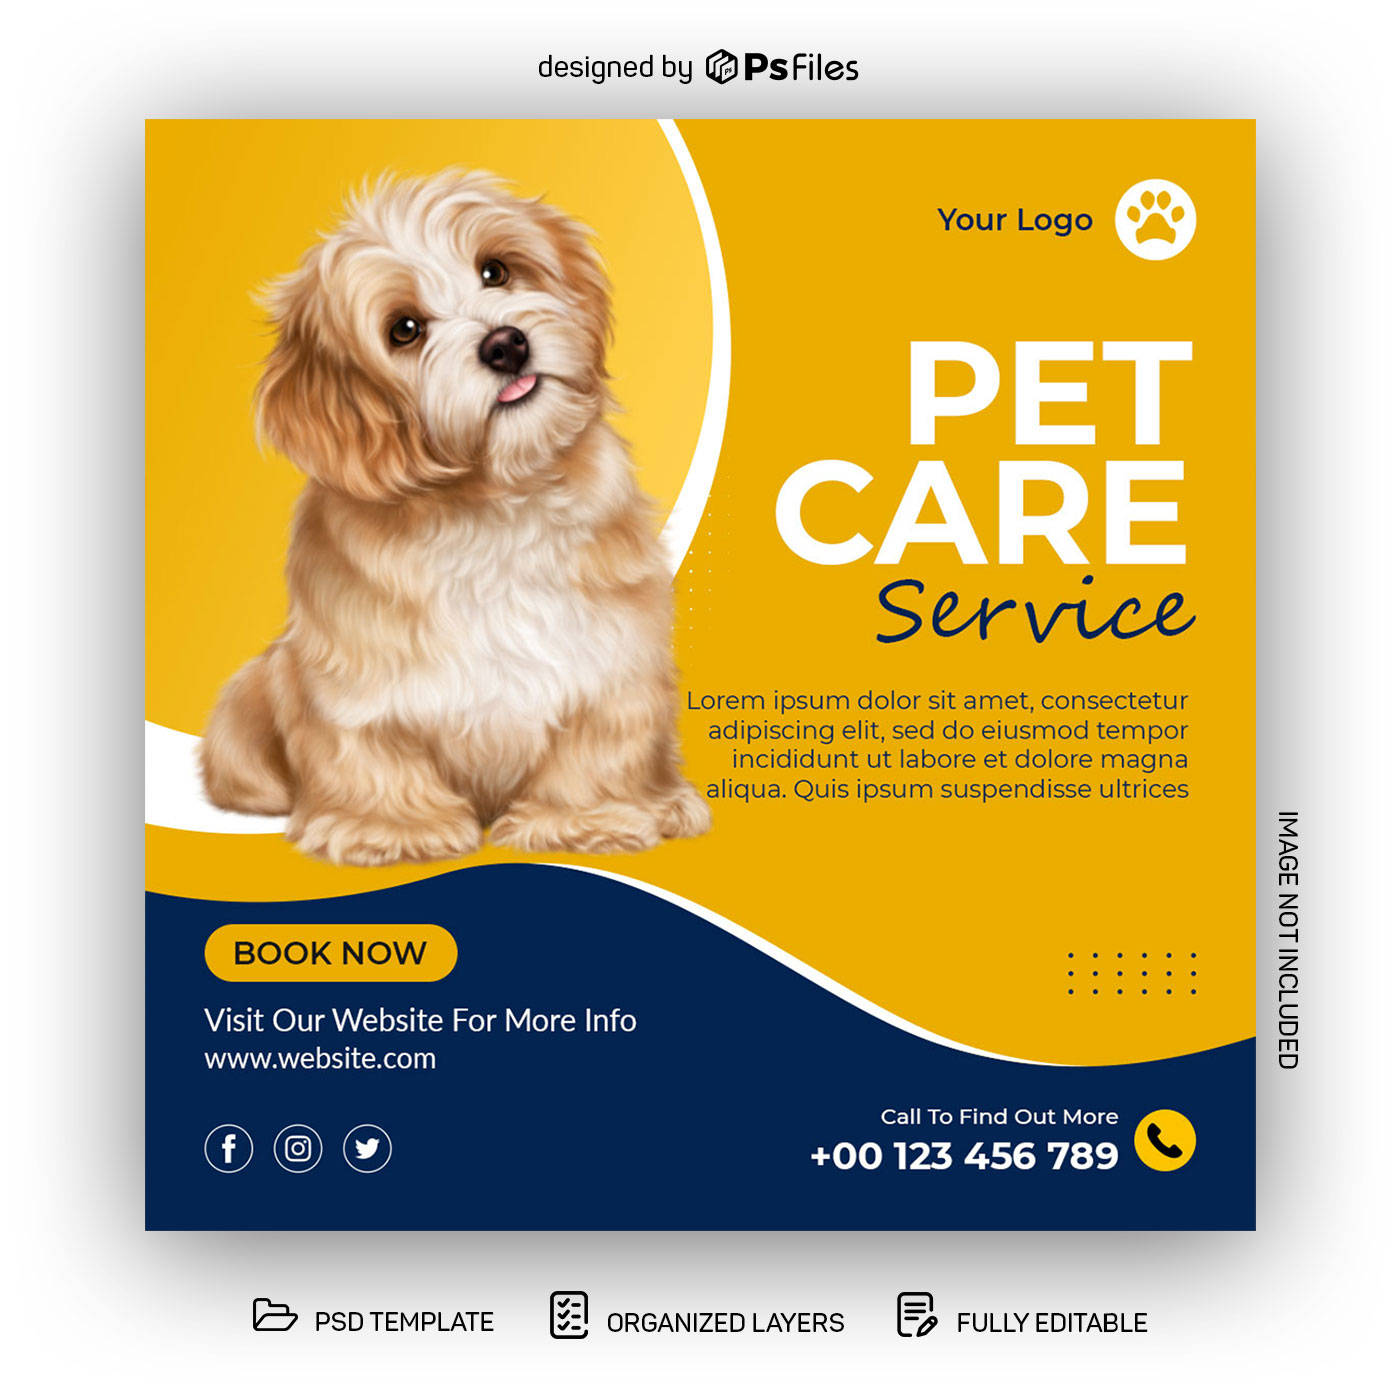 PsFiles Free Pets Care Instagram Post Design PSD Template